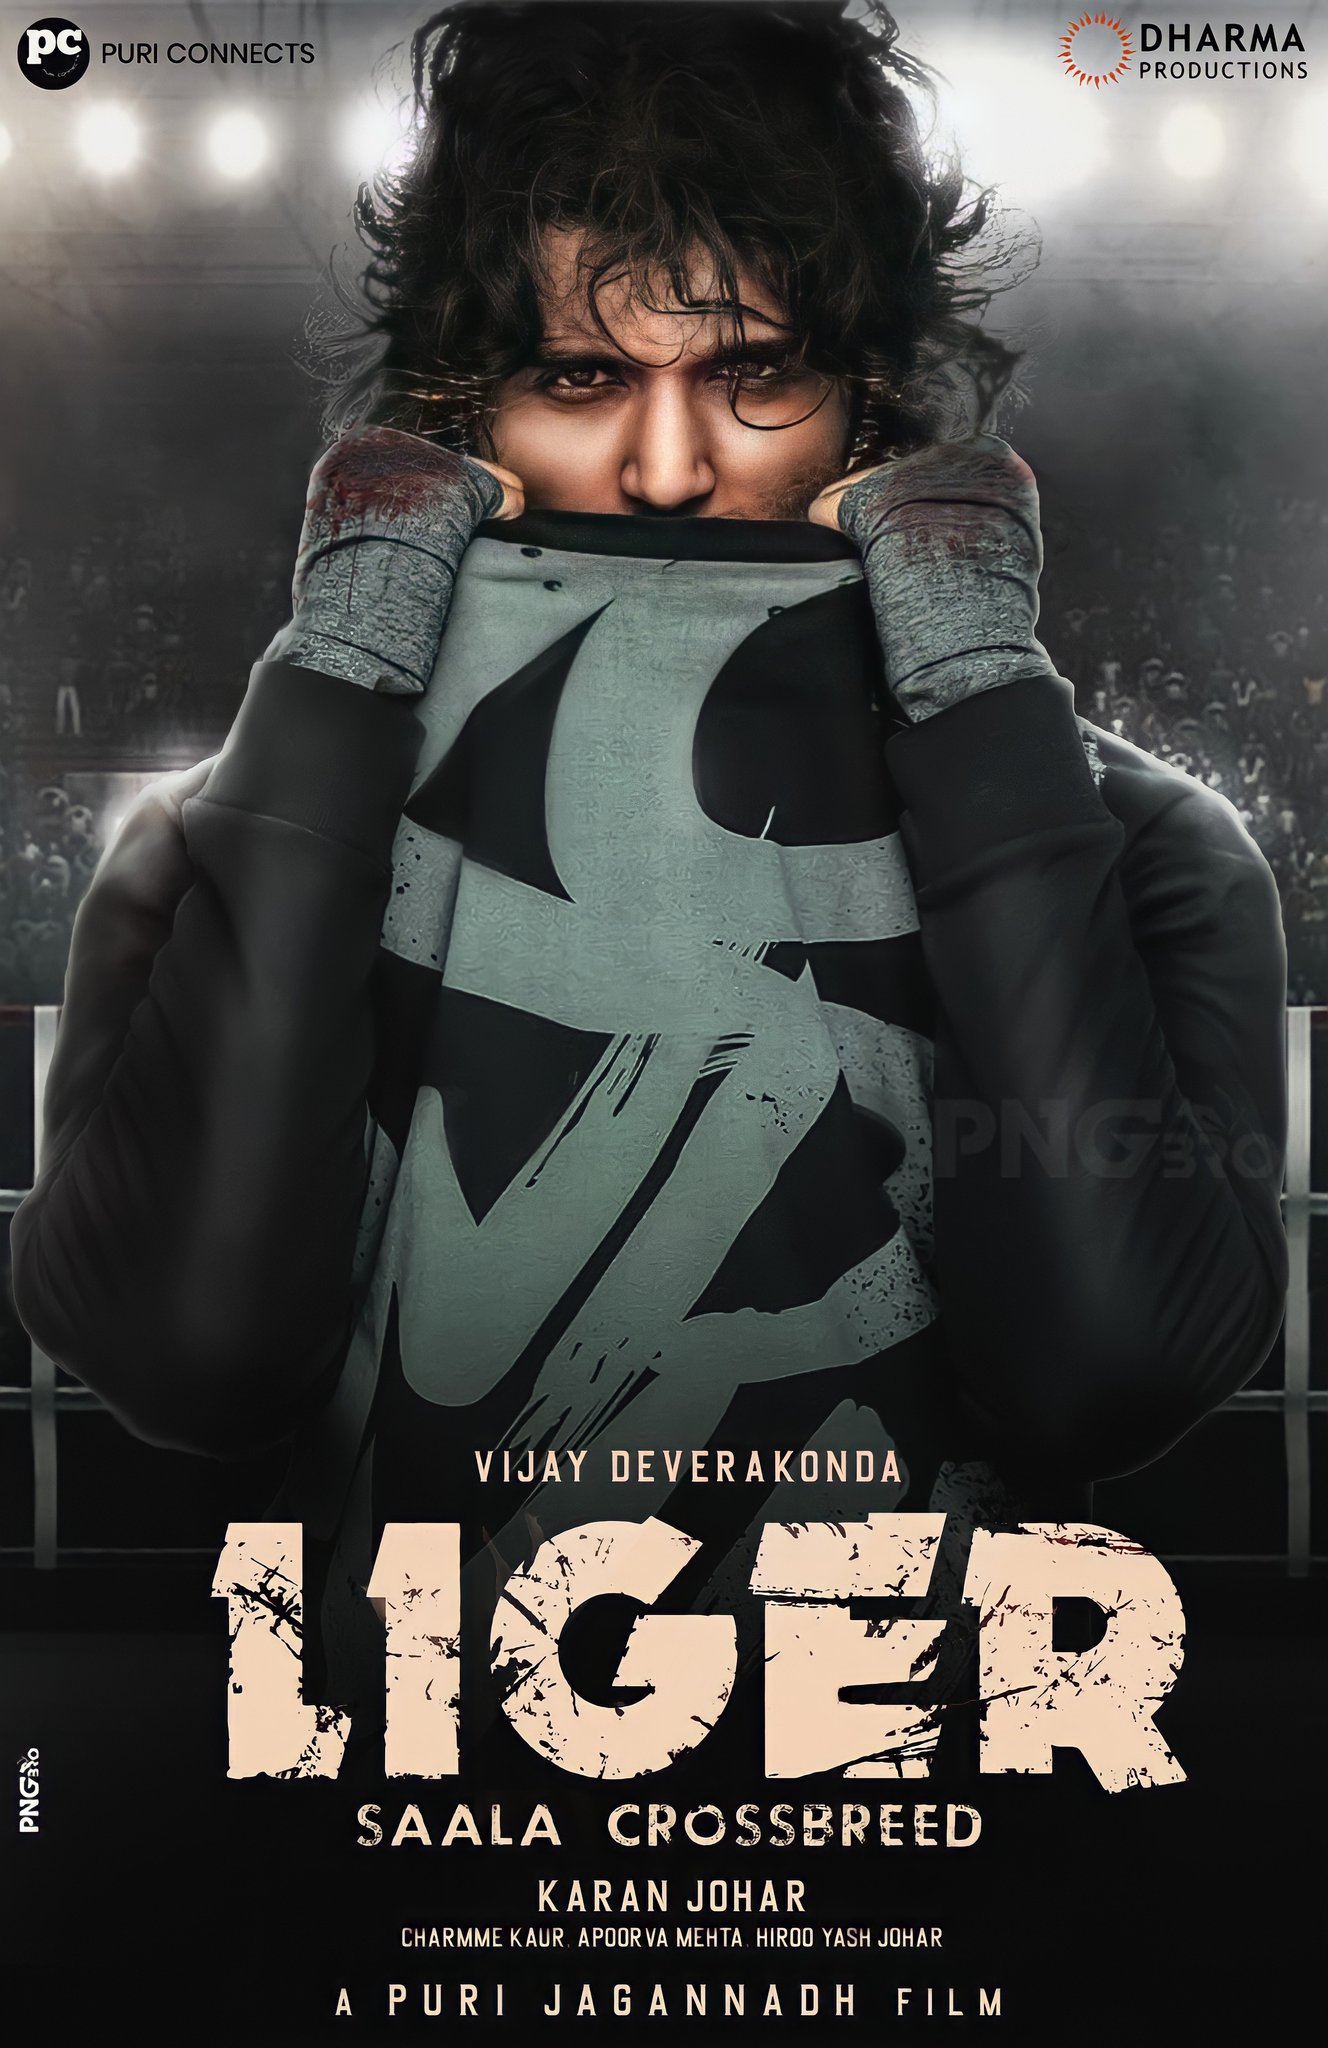 PngBro is the #LIGER Unofficial Poster Design HD Link #SaalaCrossbreed